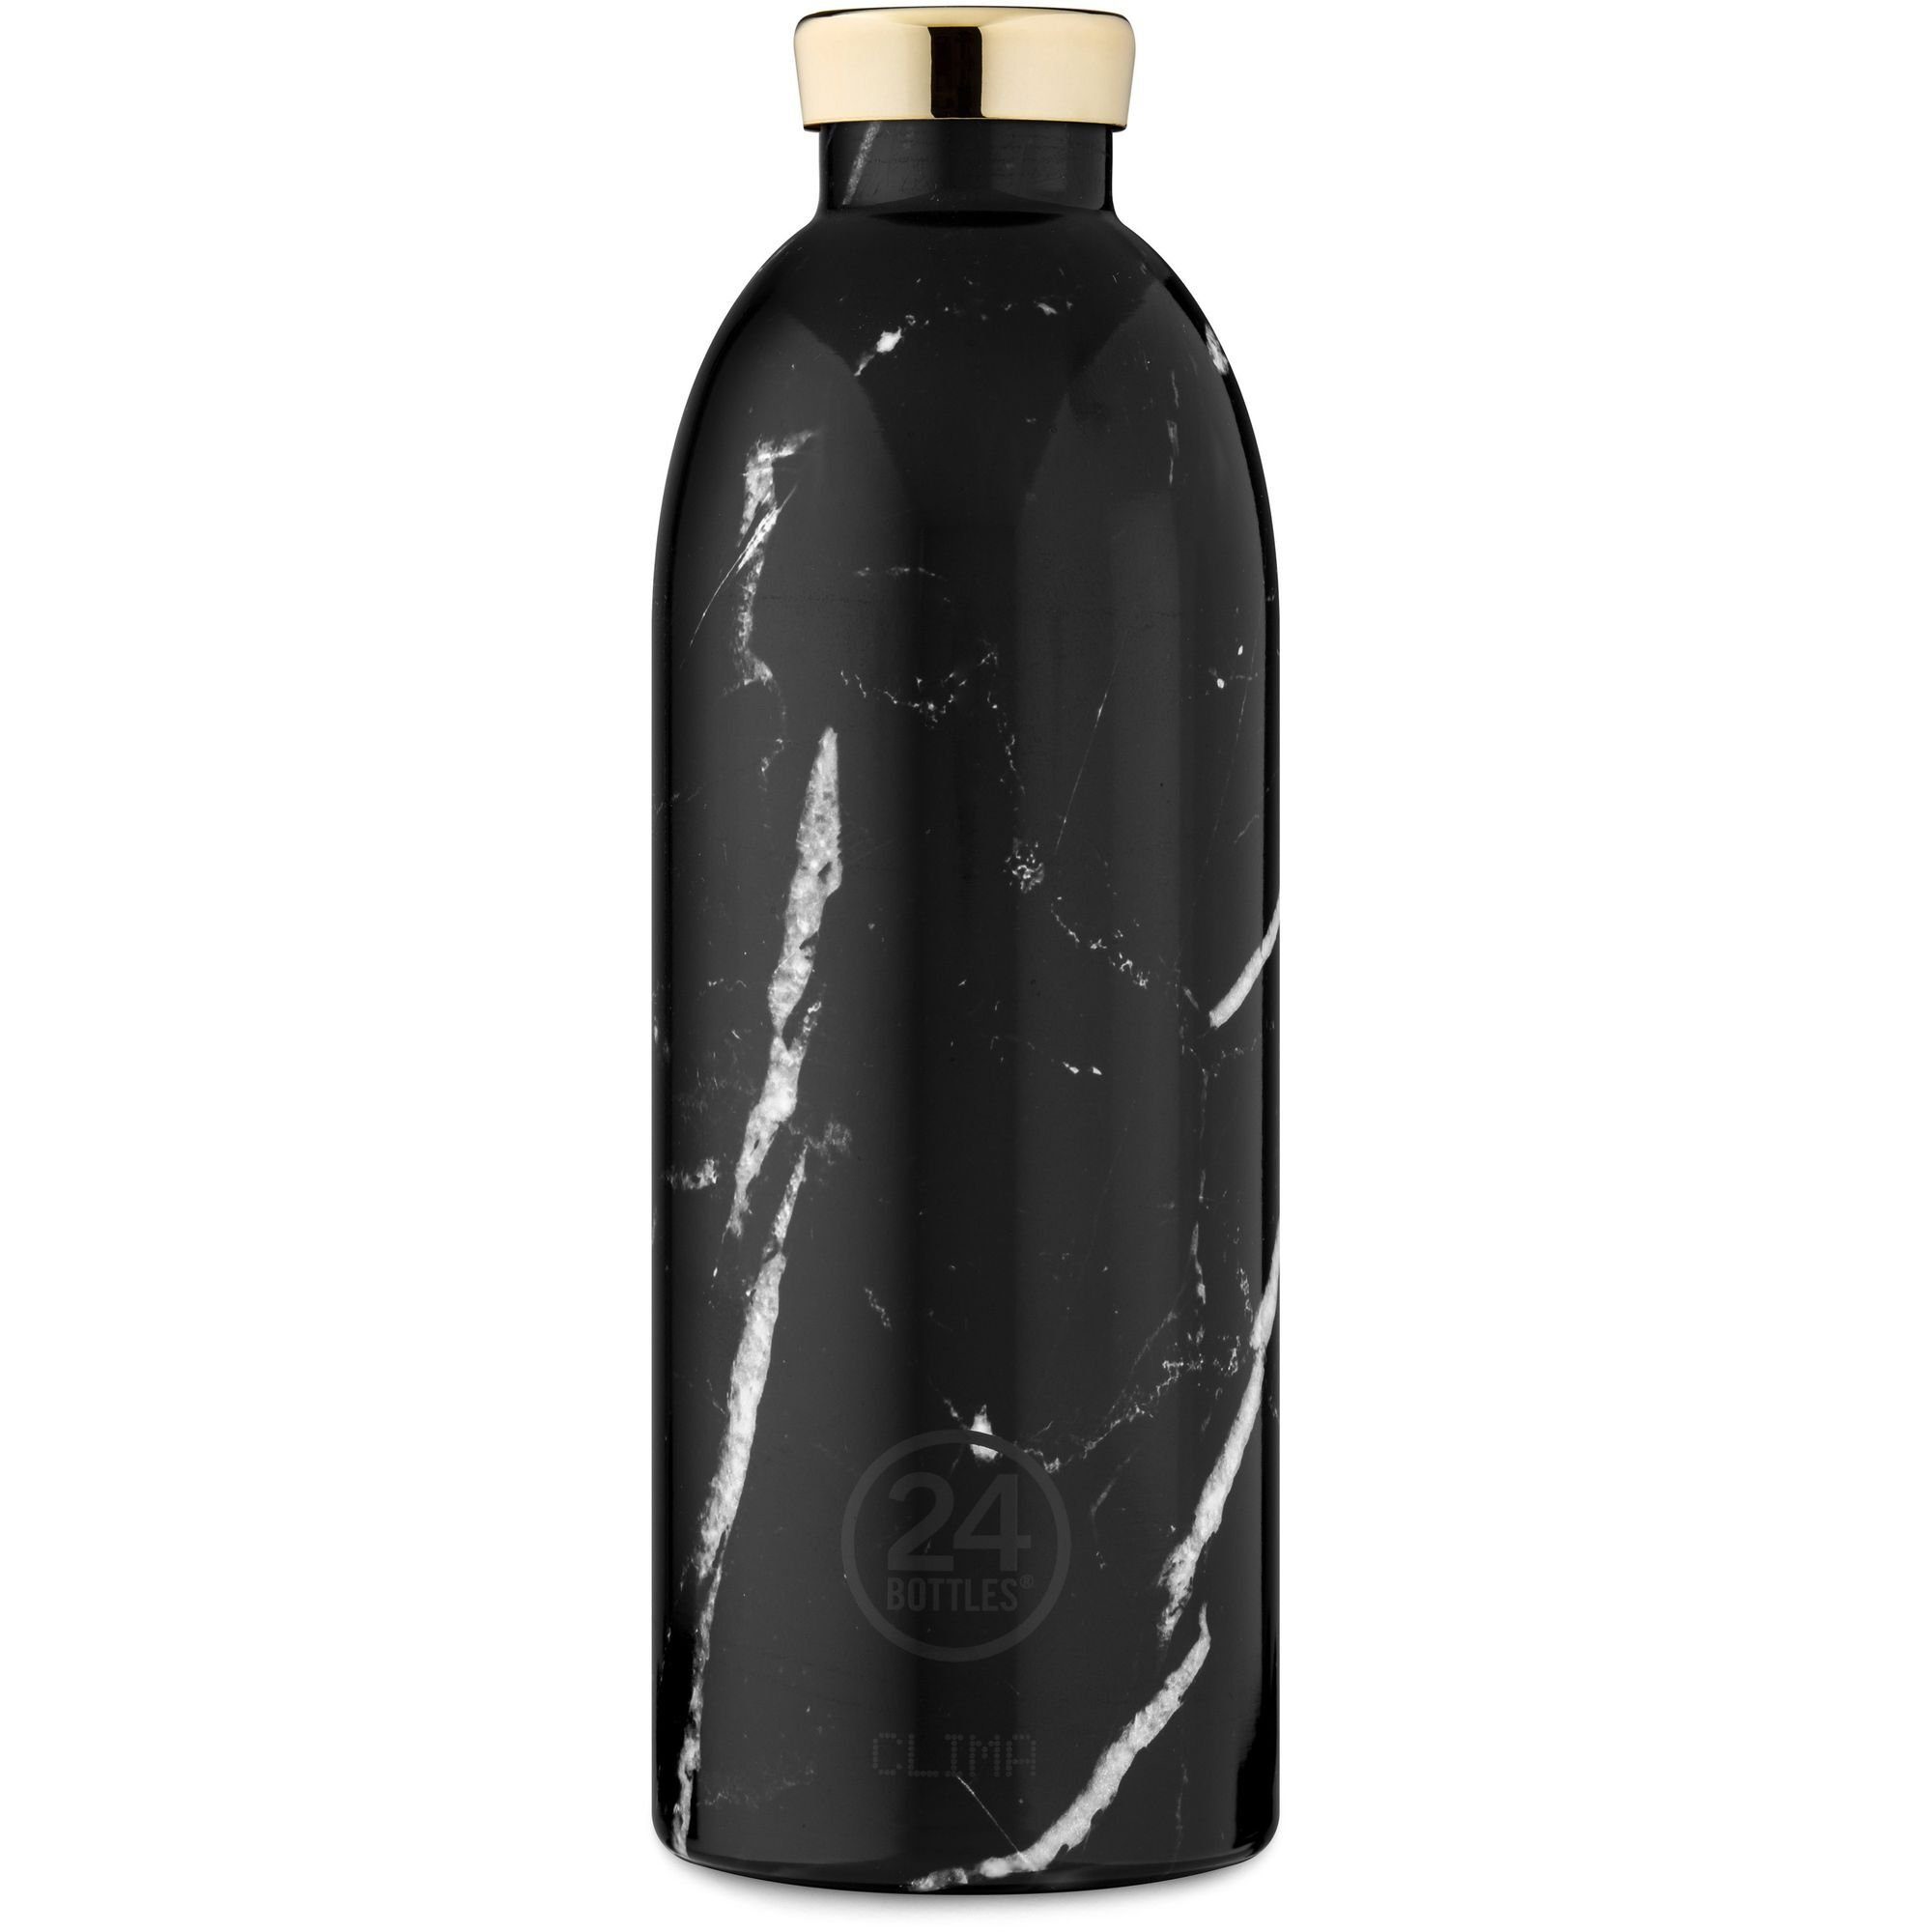 24 Bottles Trinkflasche Clima black marble